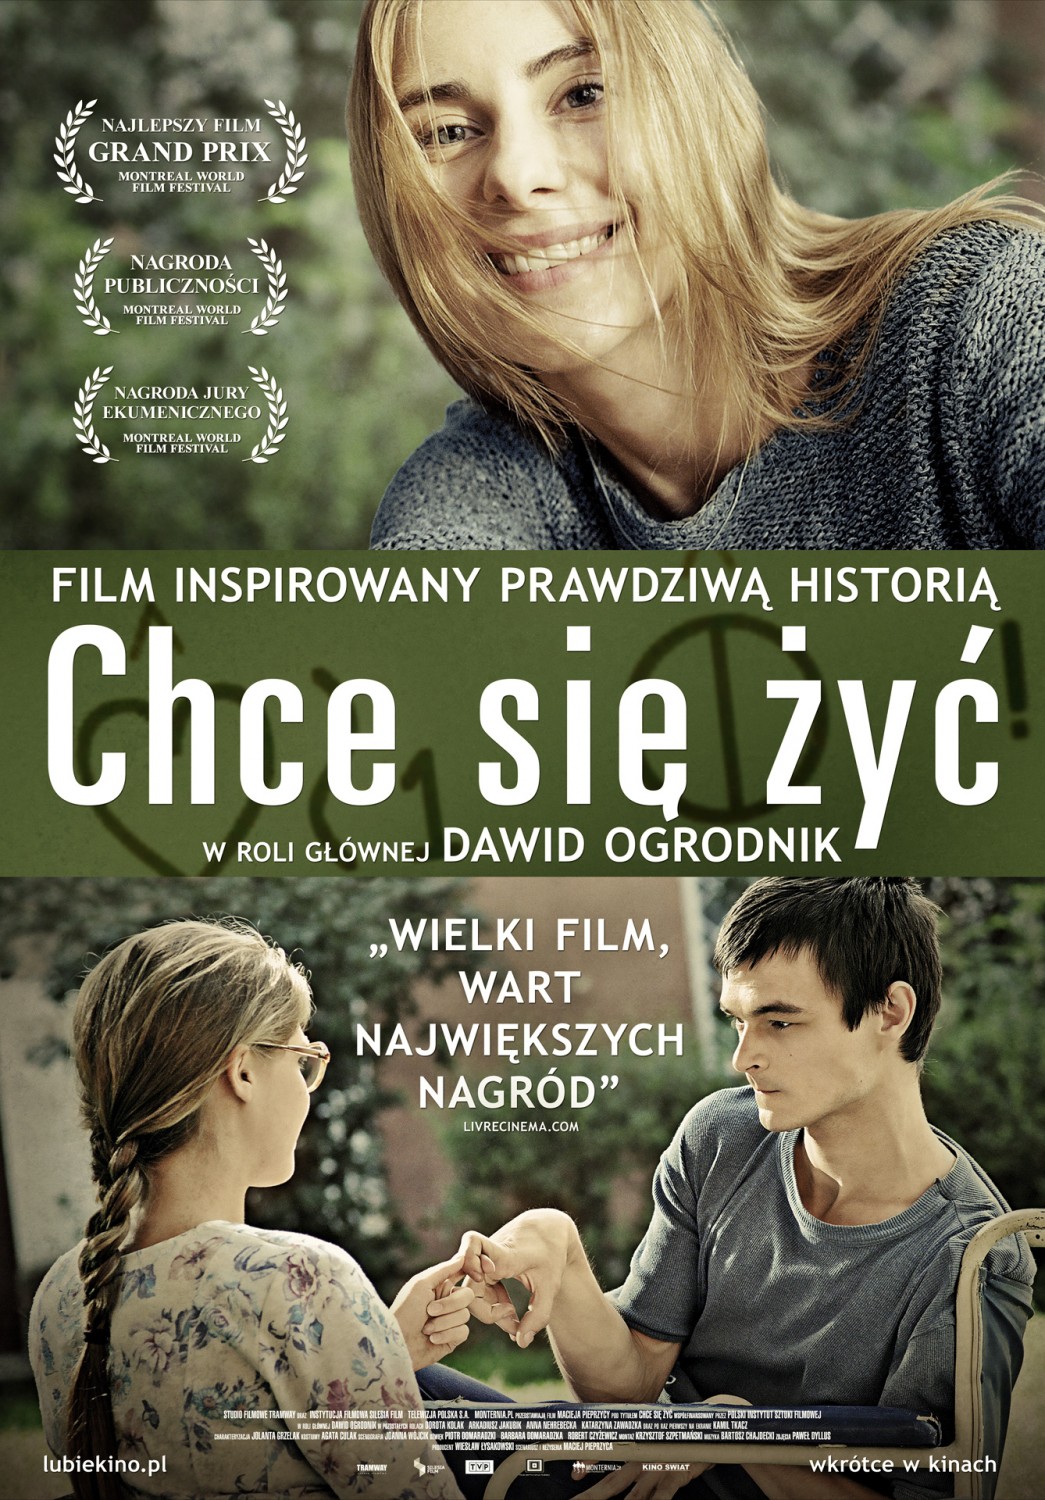 Extra Large Movie Poster Image for Chce sie zyc 